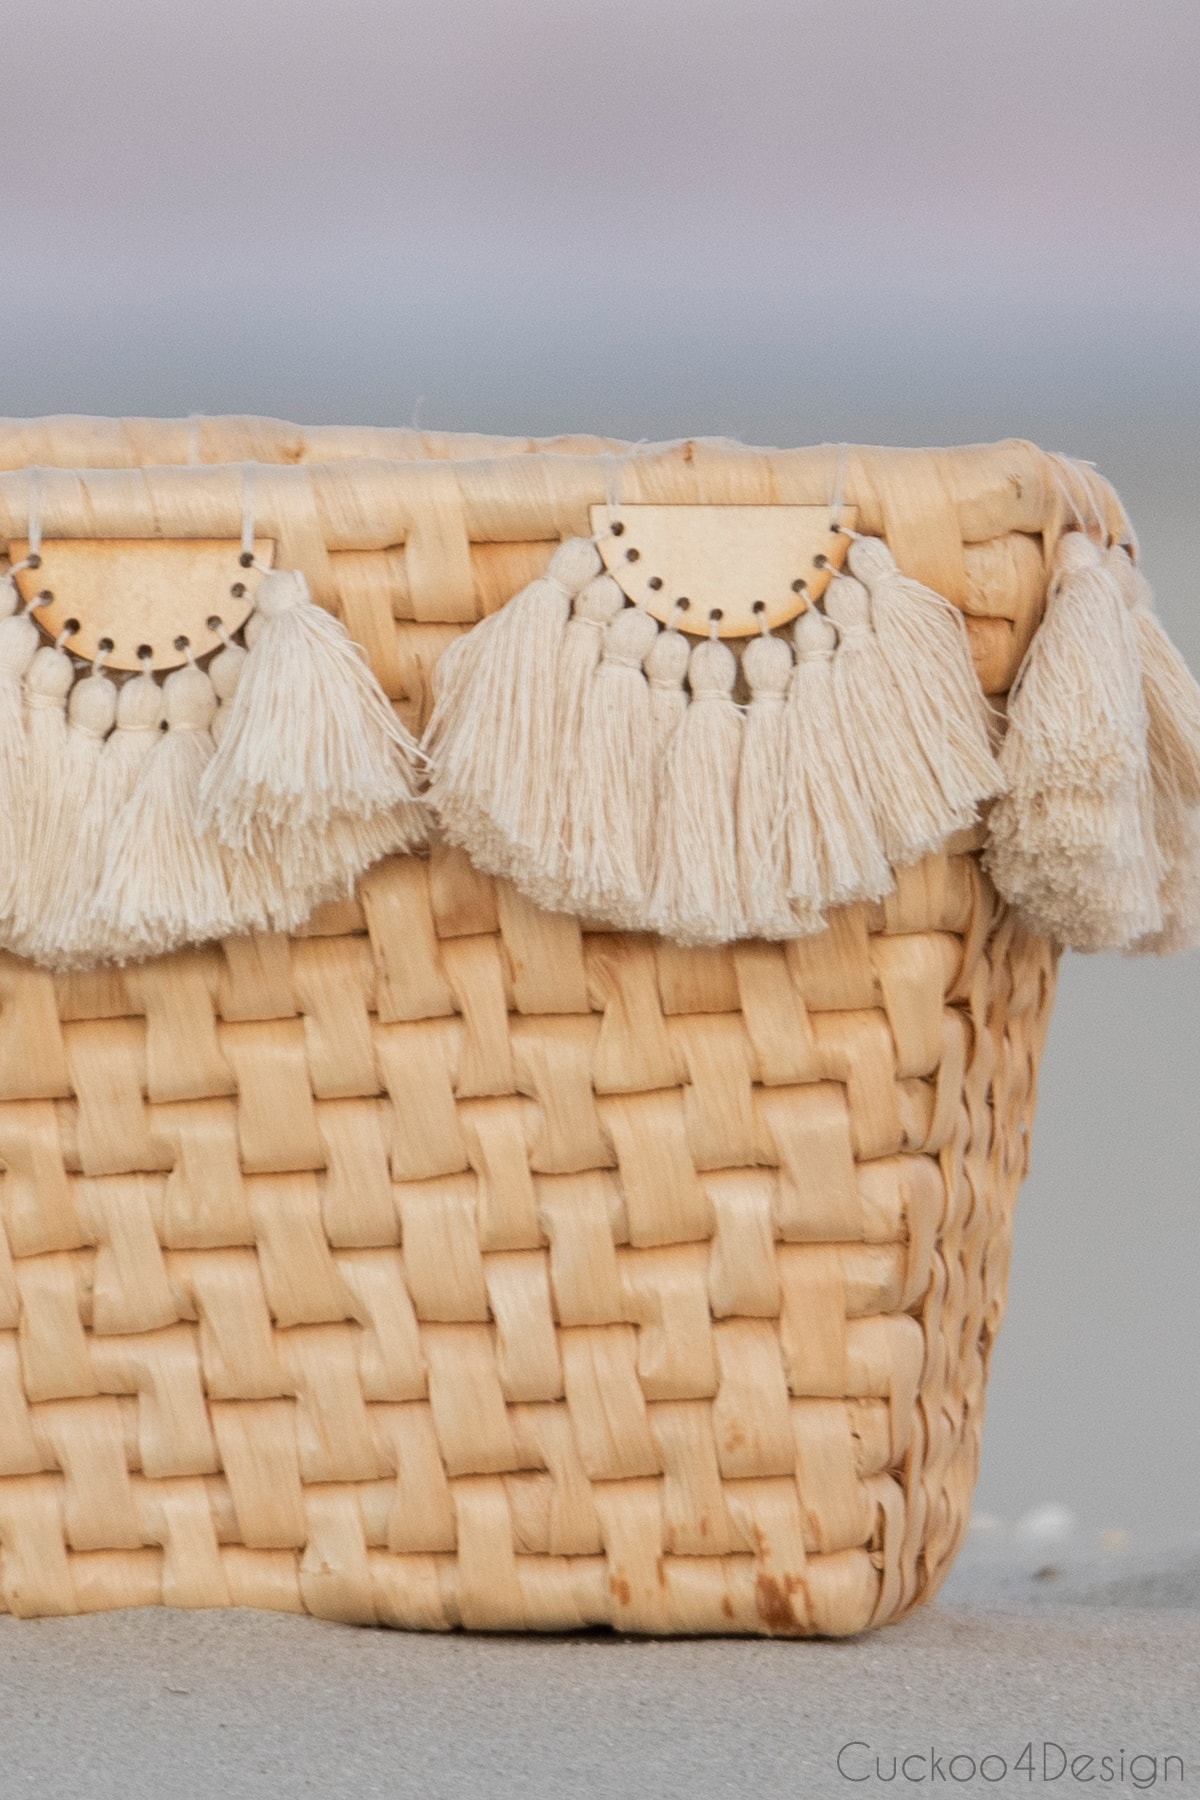 tassel embellishment on a basket that is sitting on the beach